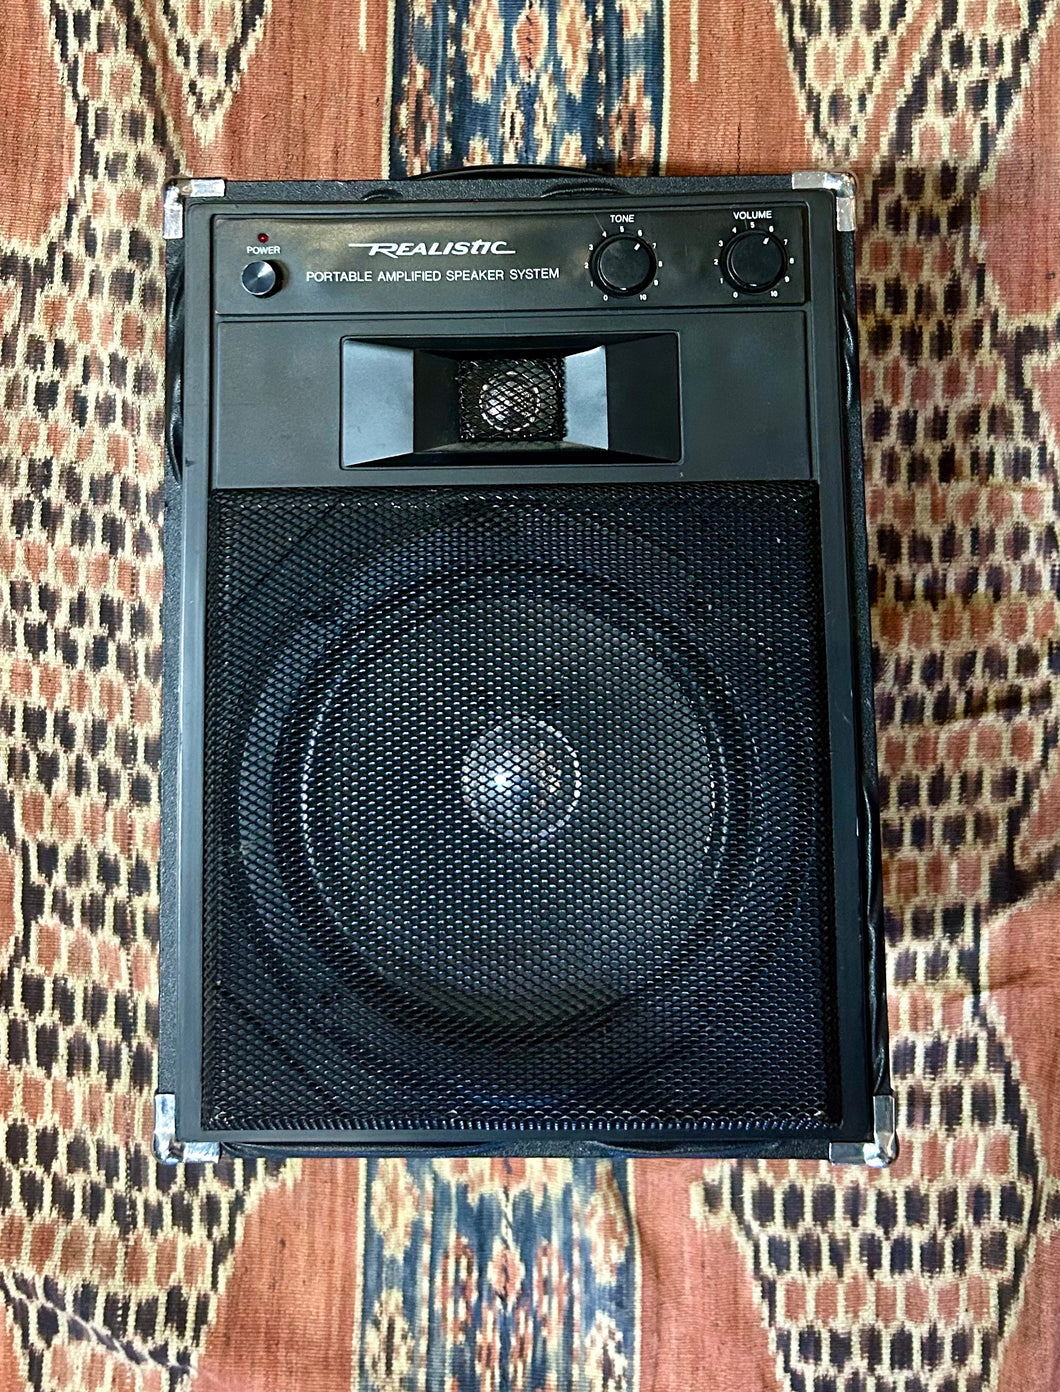 Realistic Portable Amplified Speaker System Secondhand